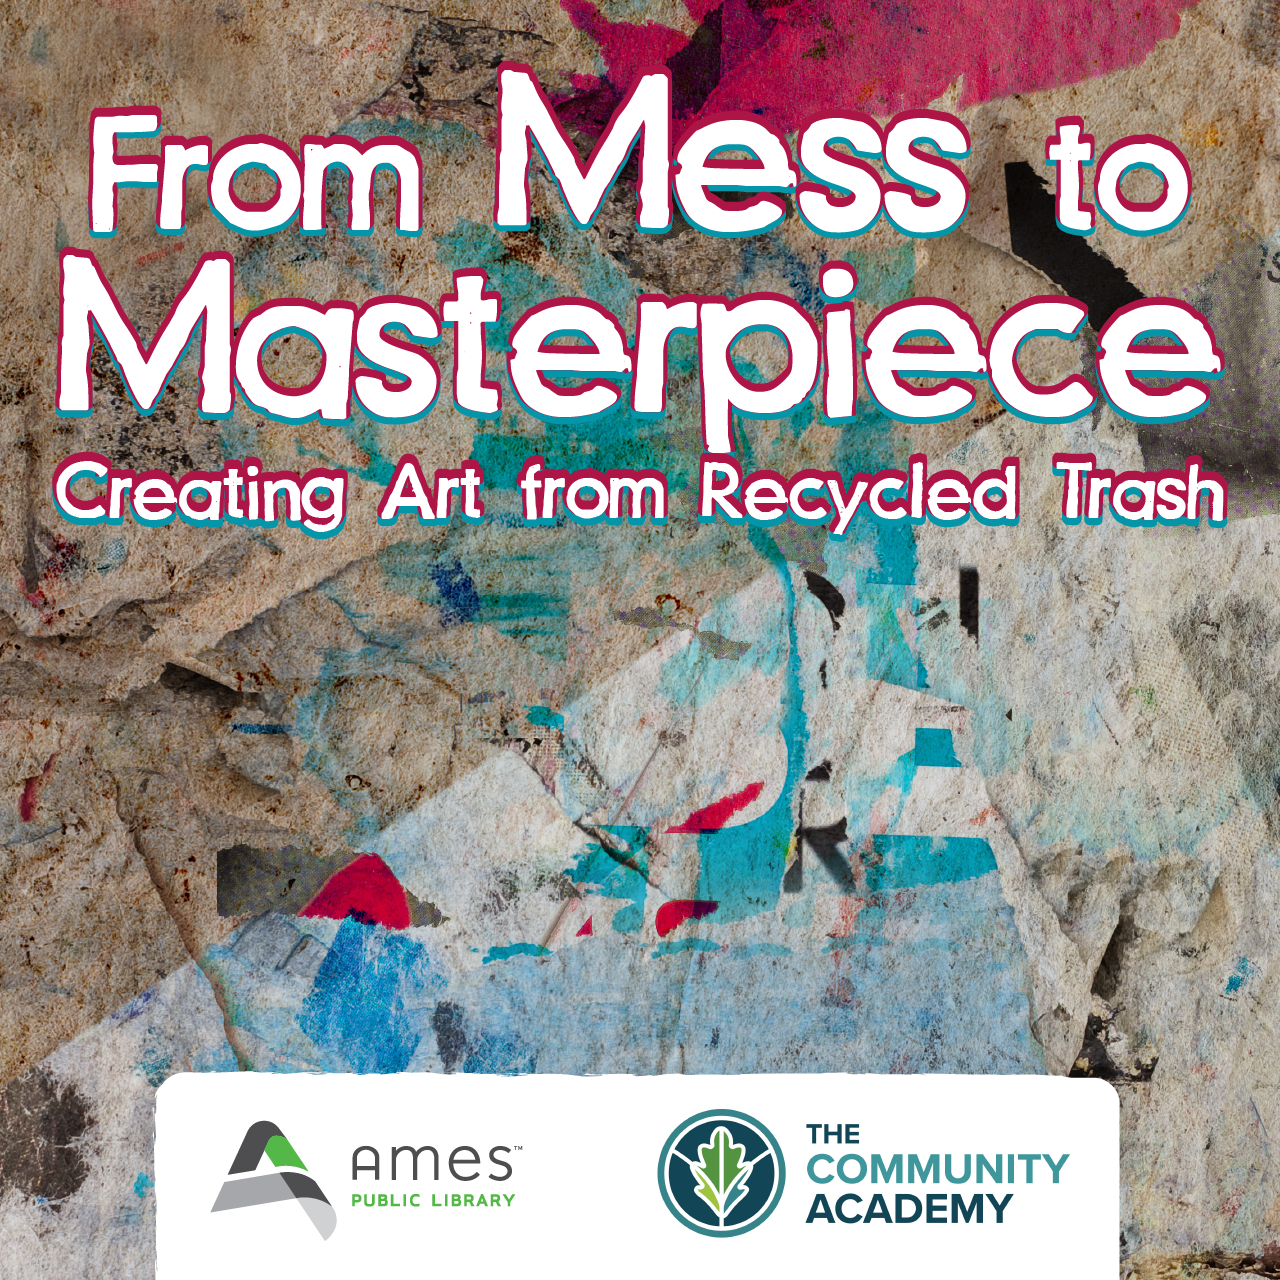 From Mess to Masterpiece: Creating Art from Recycled Trash